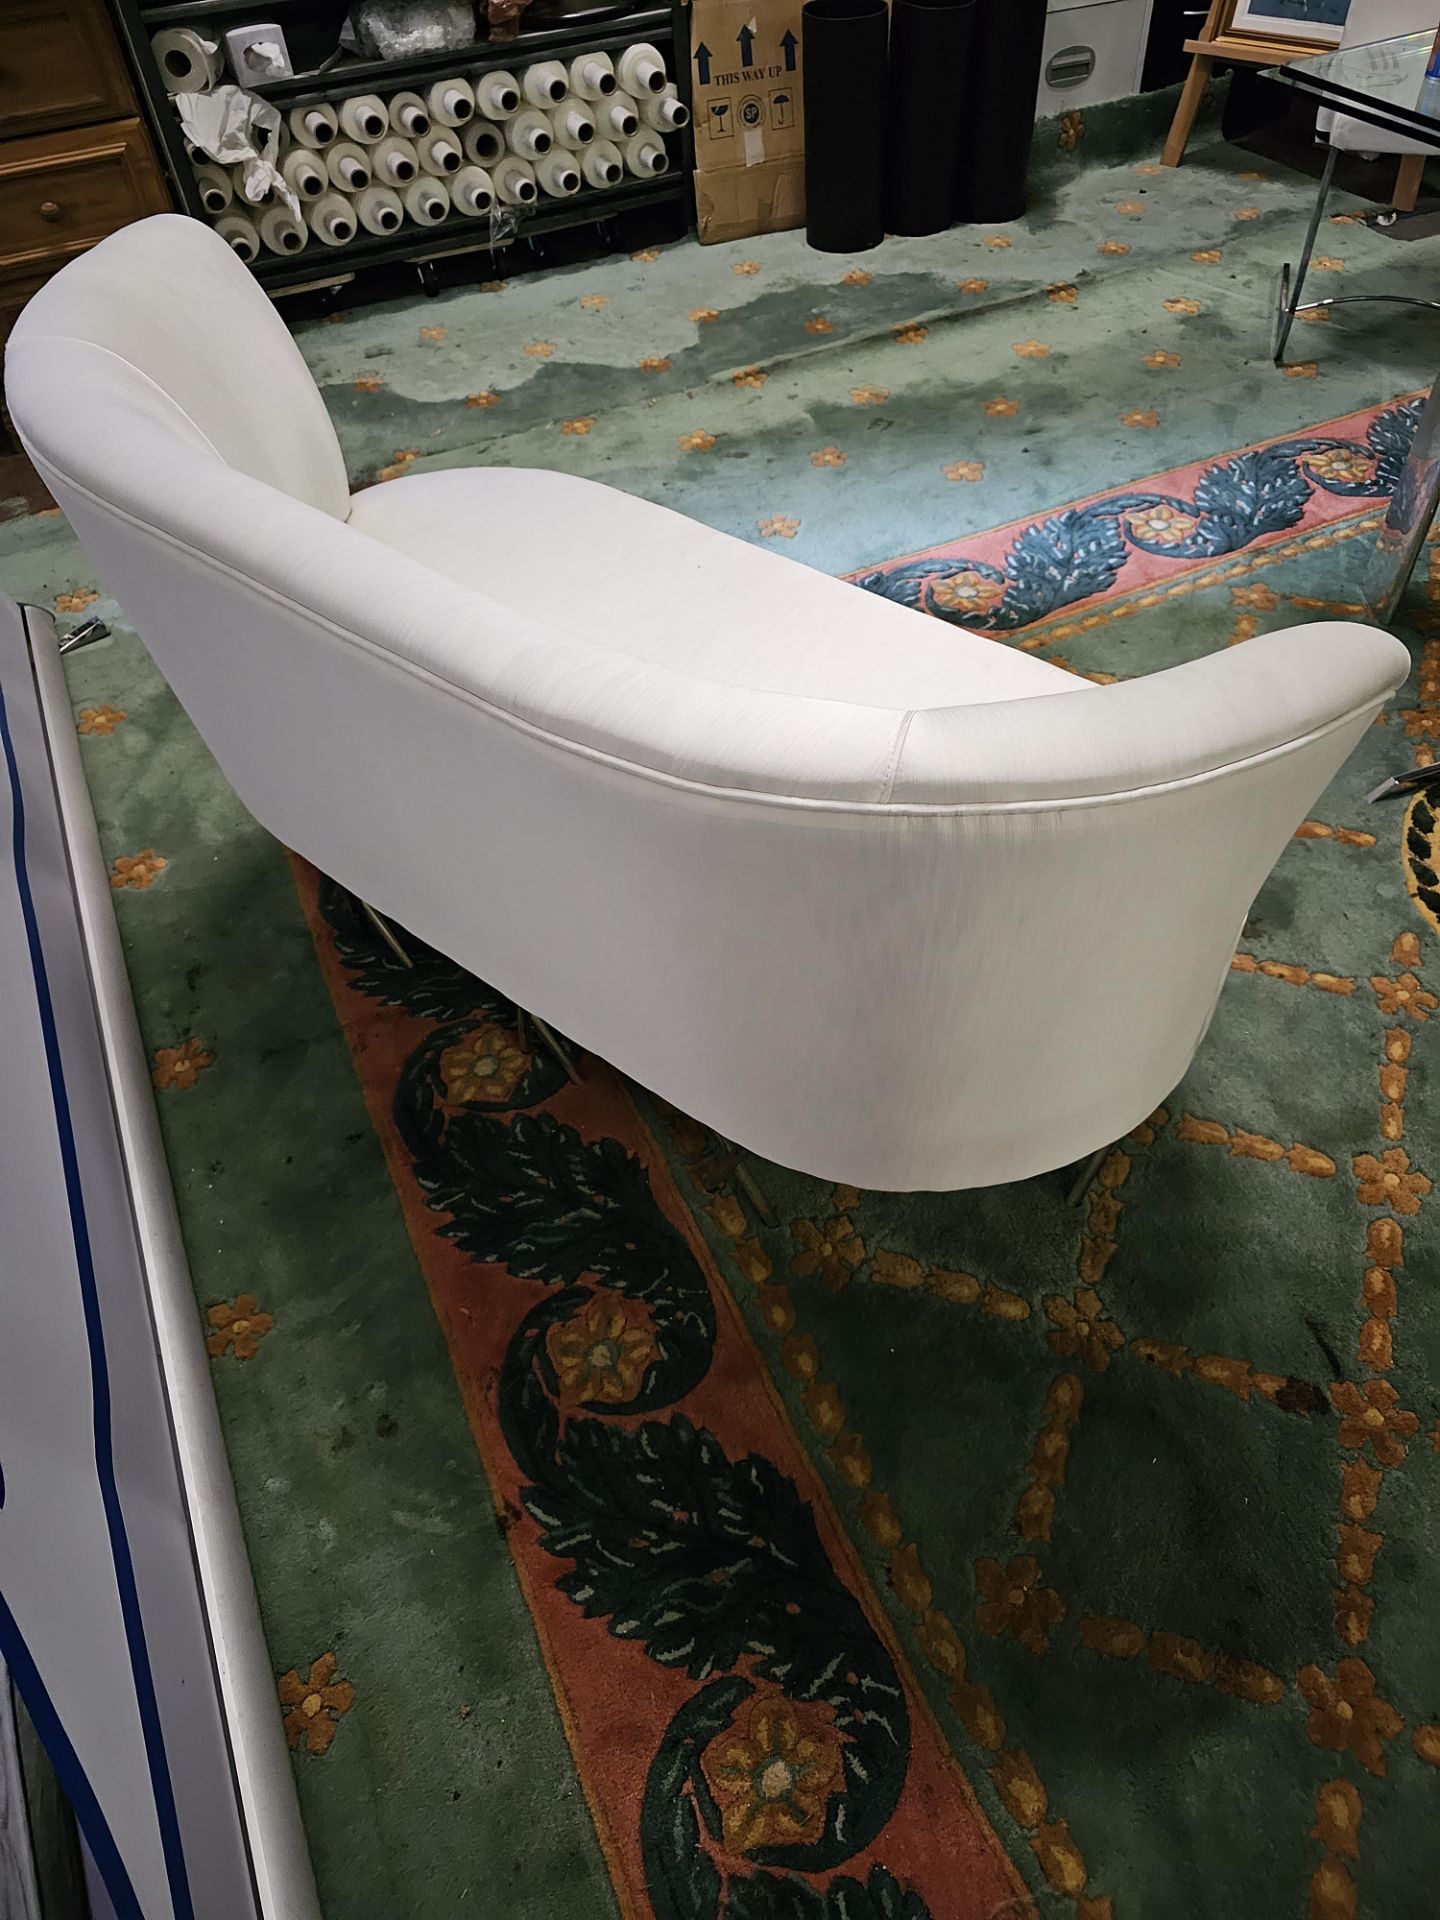 Two Seater Love Seat In A Shiny Oyster White Upholstery On Chrome Feet 155cm x 70cm x 73cm high - Image 6 of 10